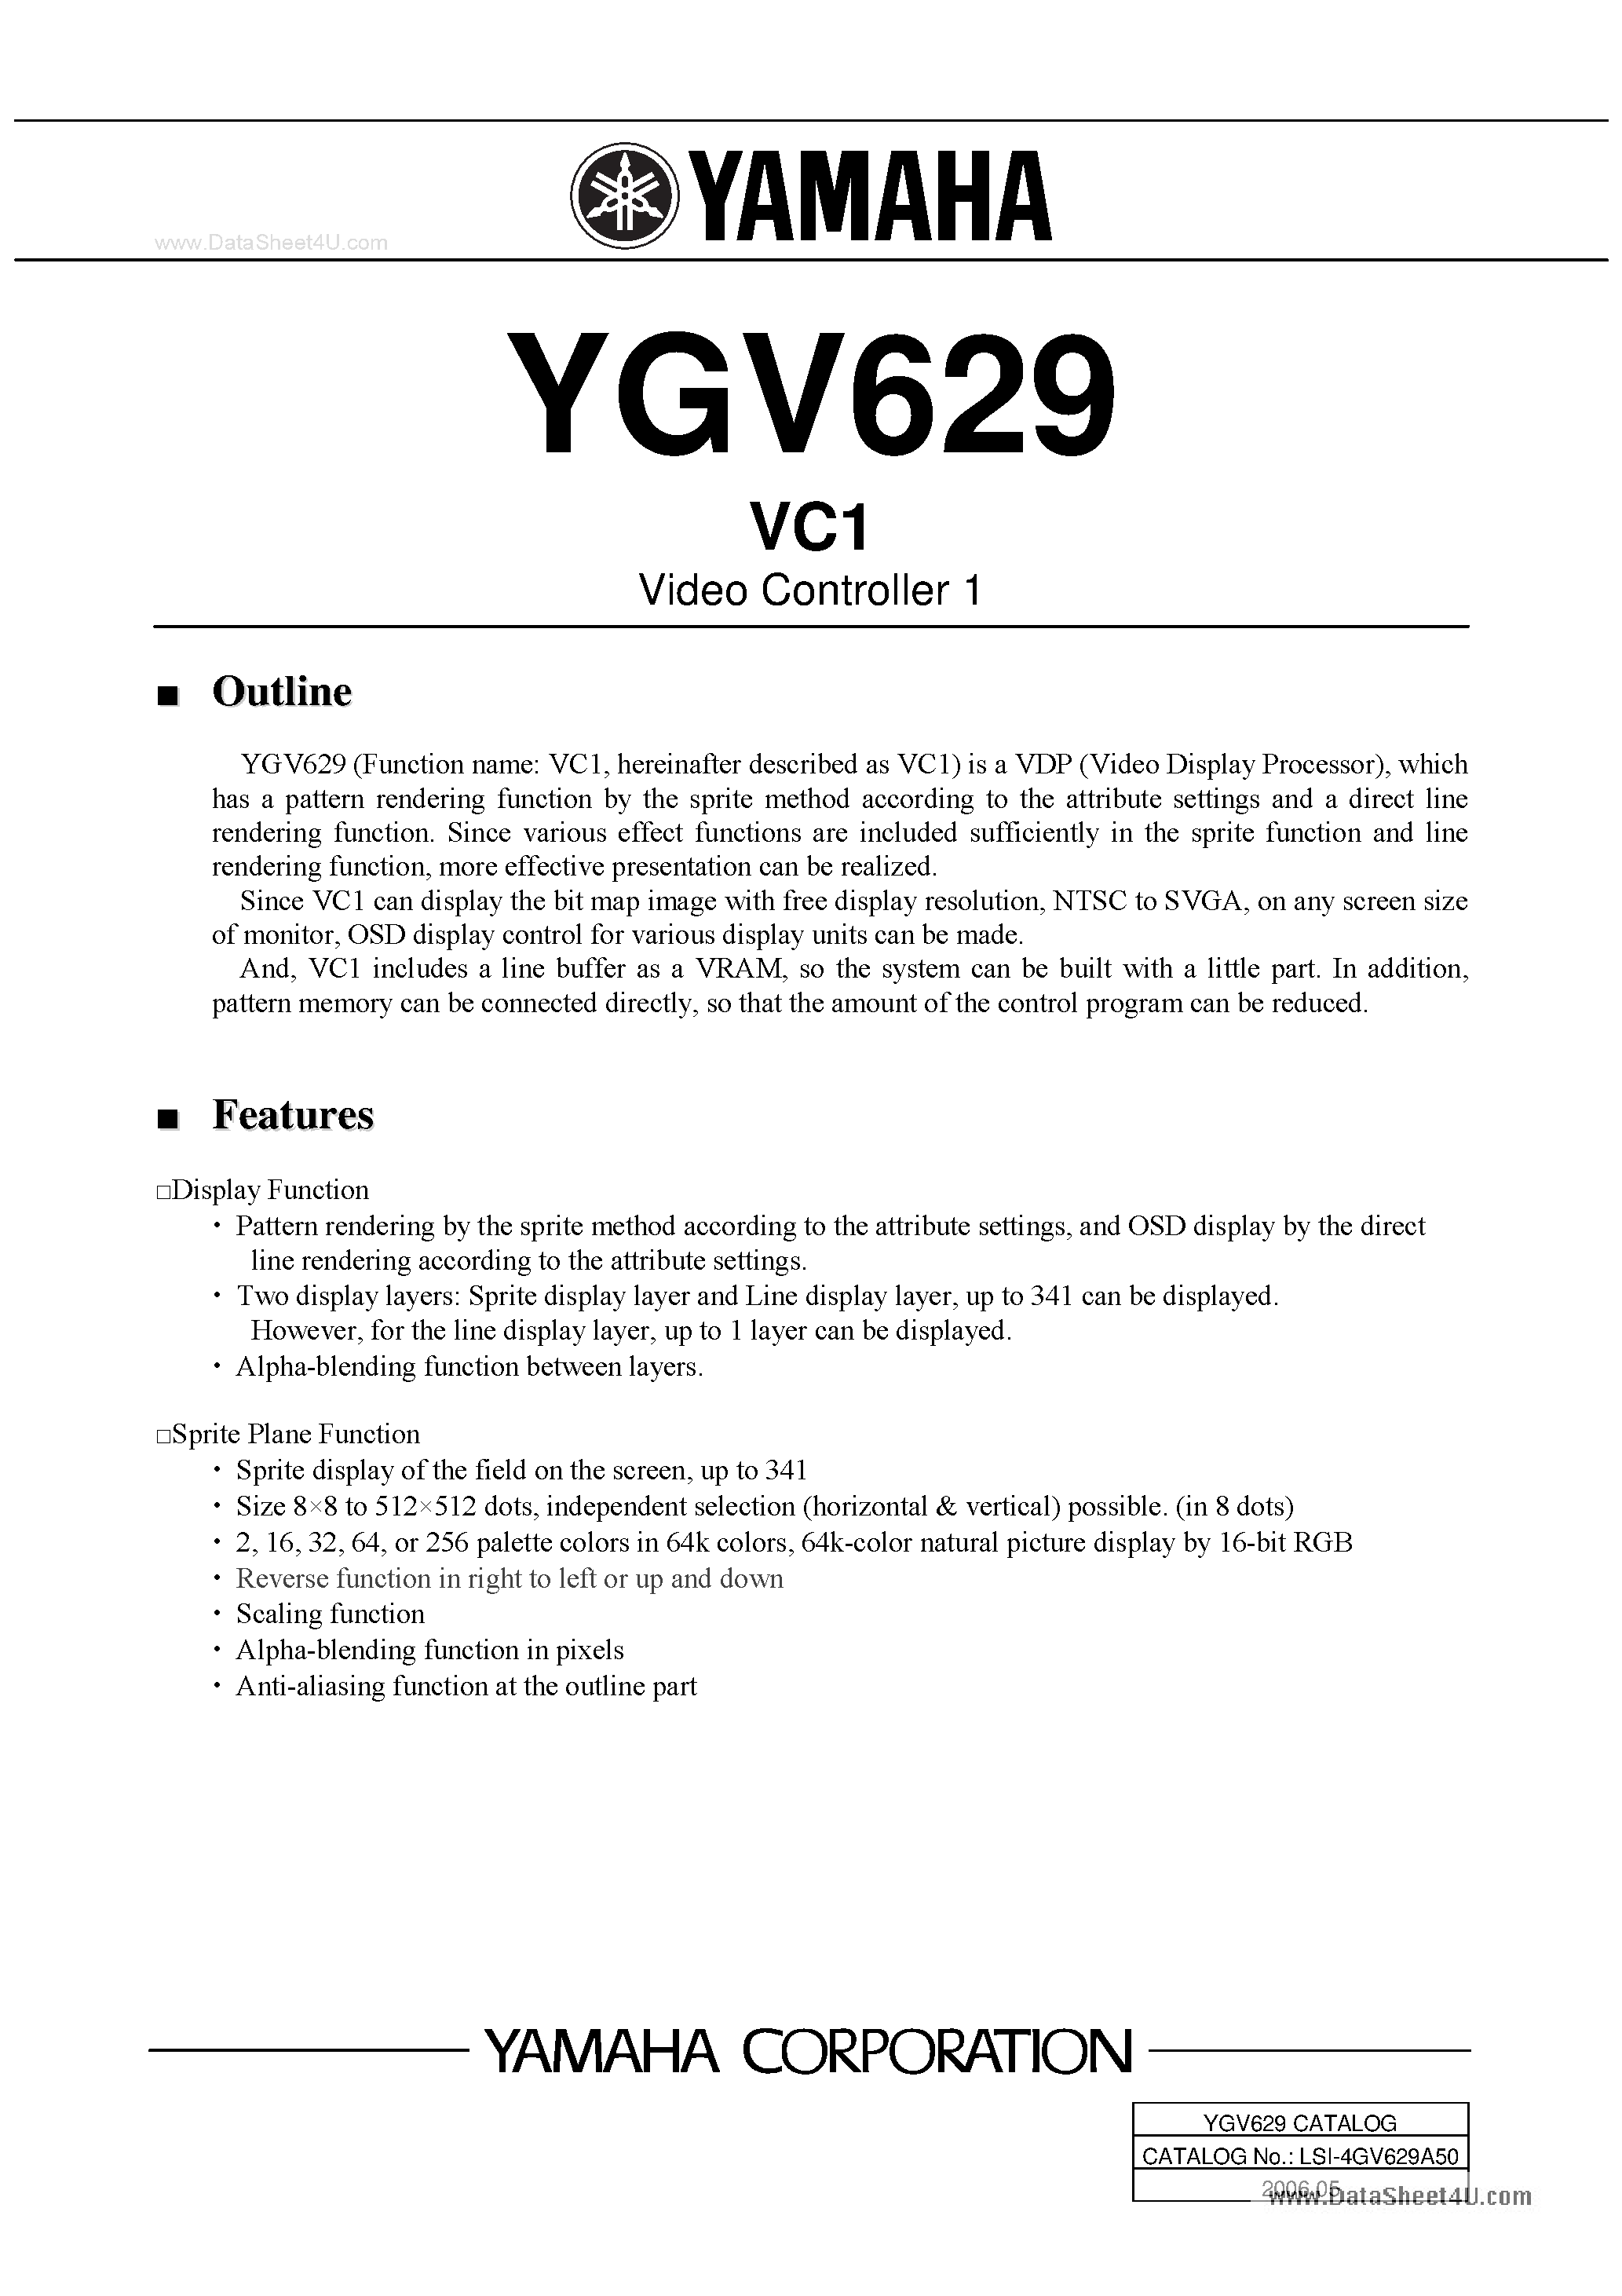 Datasheet YGV629 - VC1 Video Controller 1 page 1